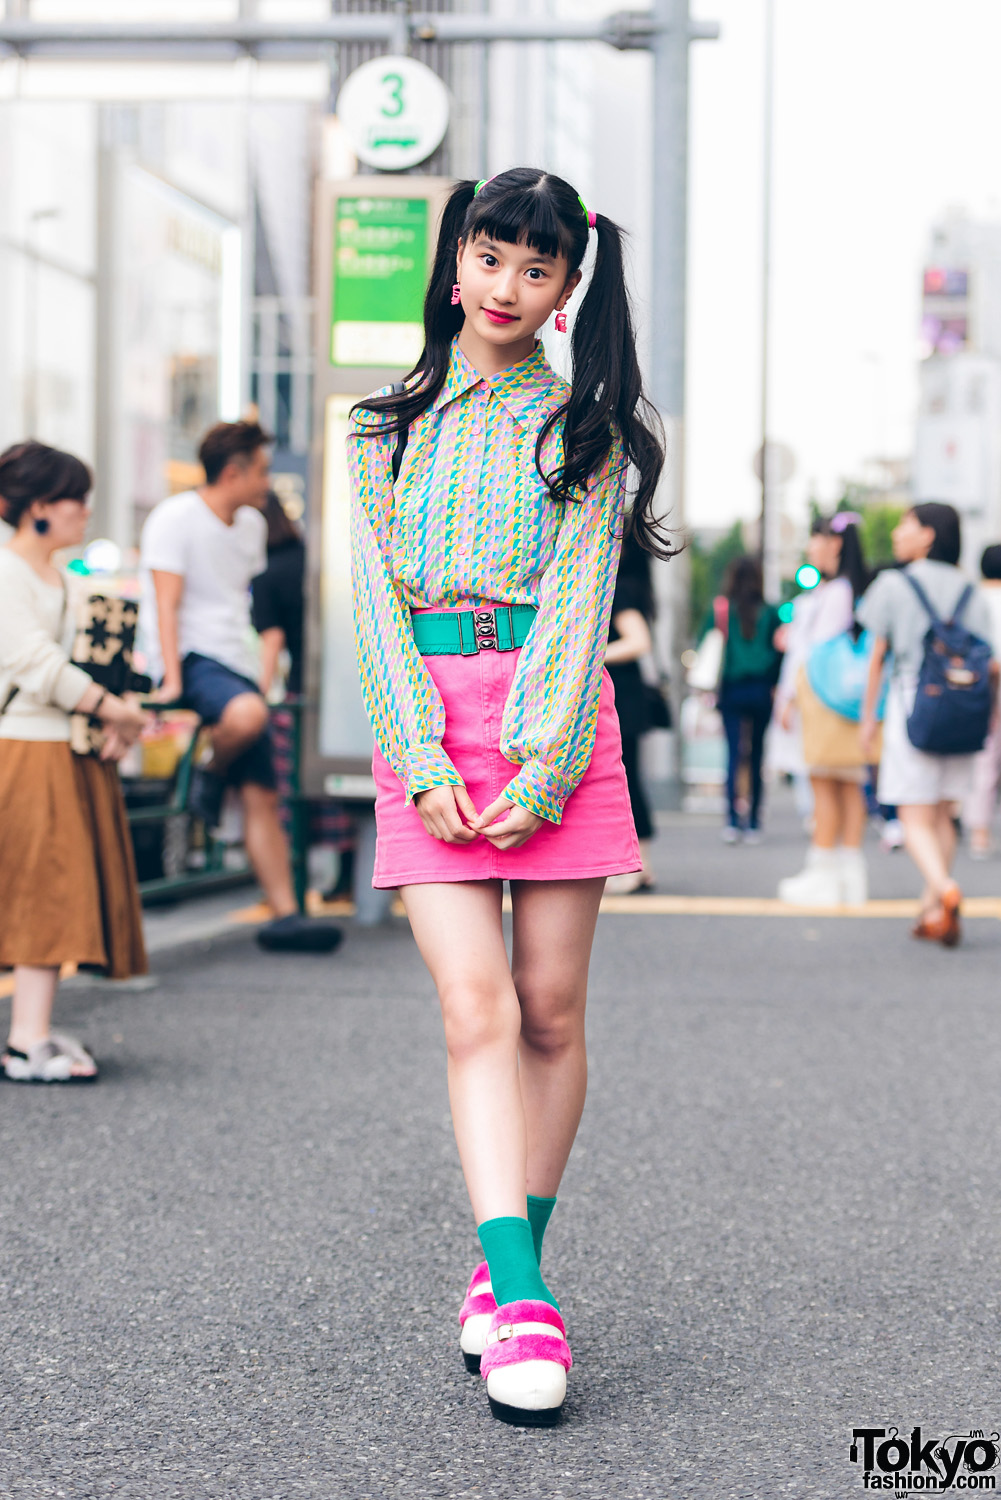 Japanese Model & Actress in Colorful Street Style w/ Vintage Denim Skirt,  Hand-Me-Down Quilted Backpack & G2? Ruffle Belt – Tokyo Fashion